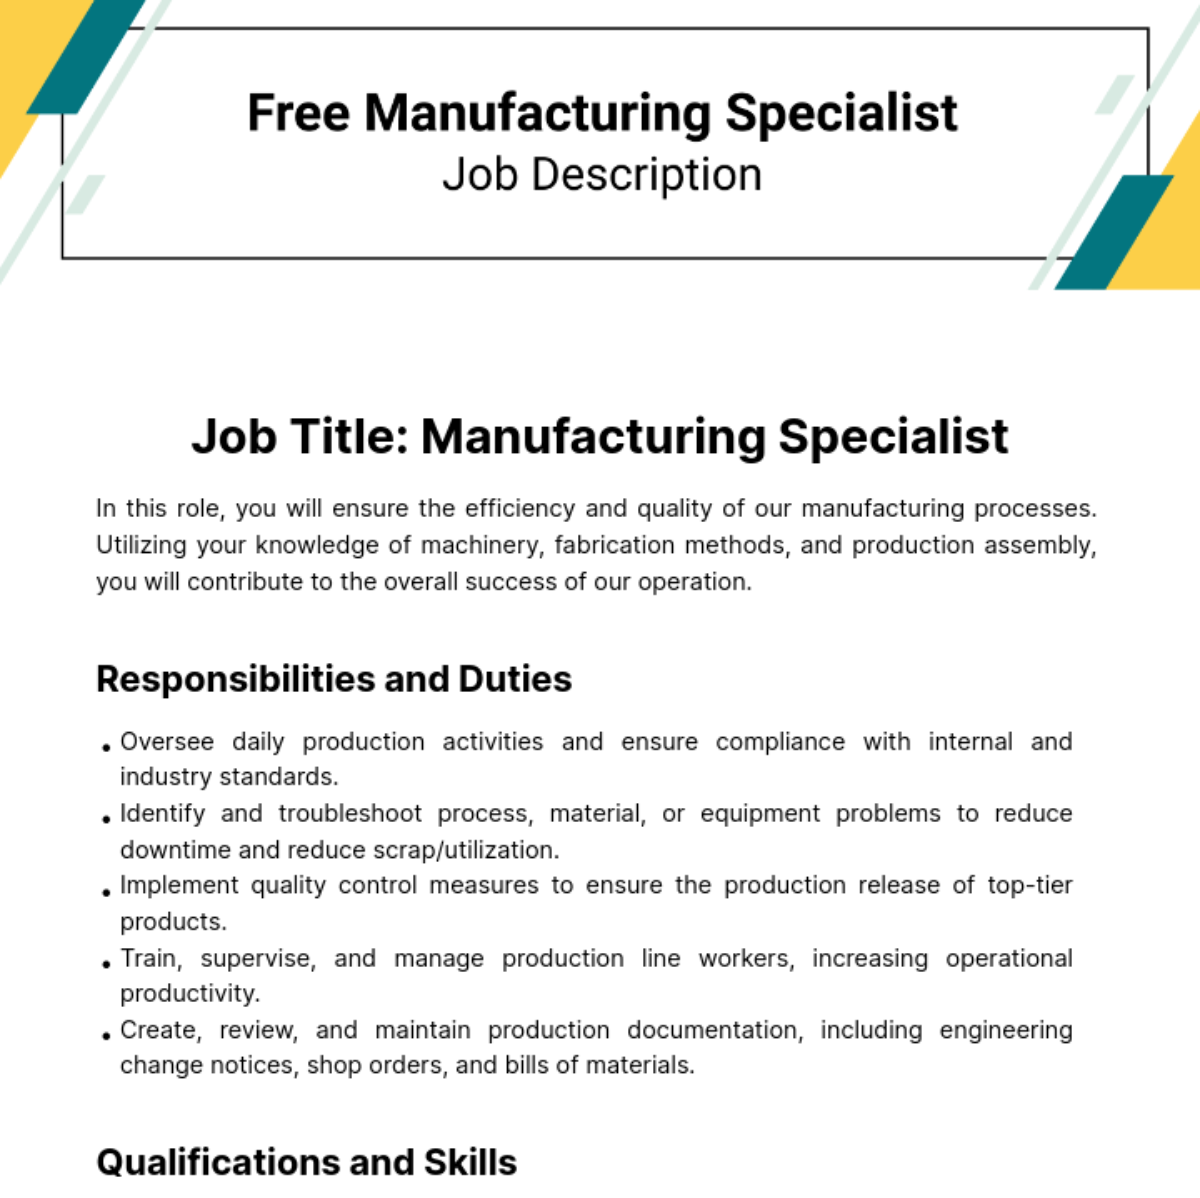 Free General Worker Job Description in Manufacturing Template